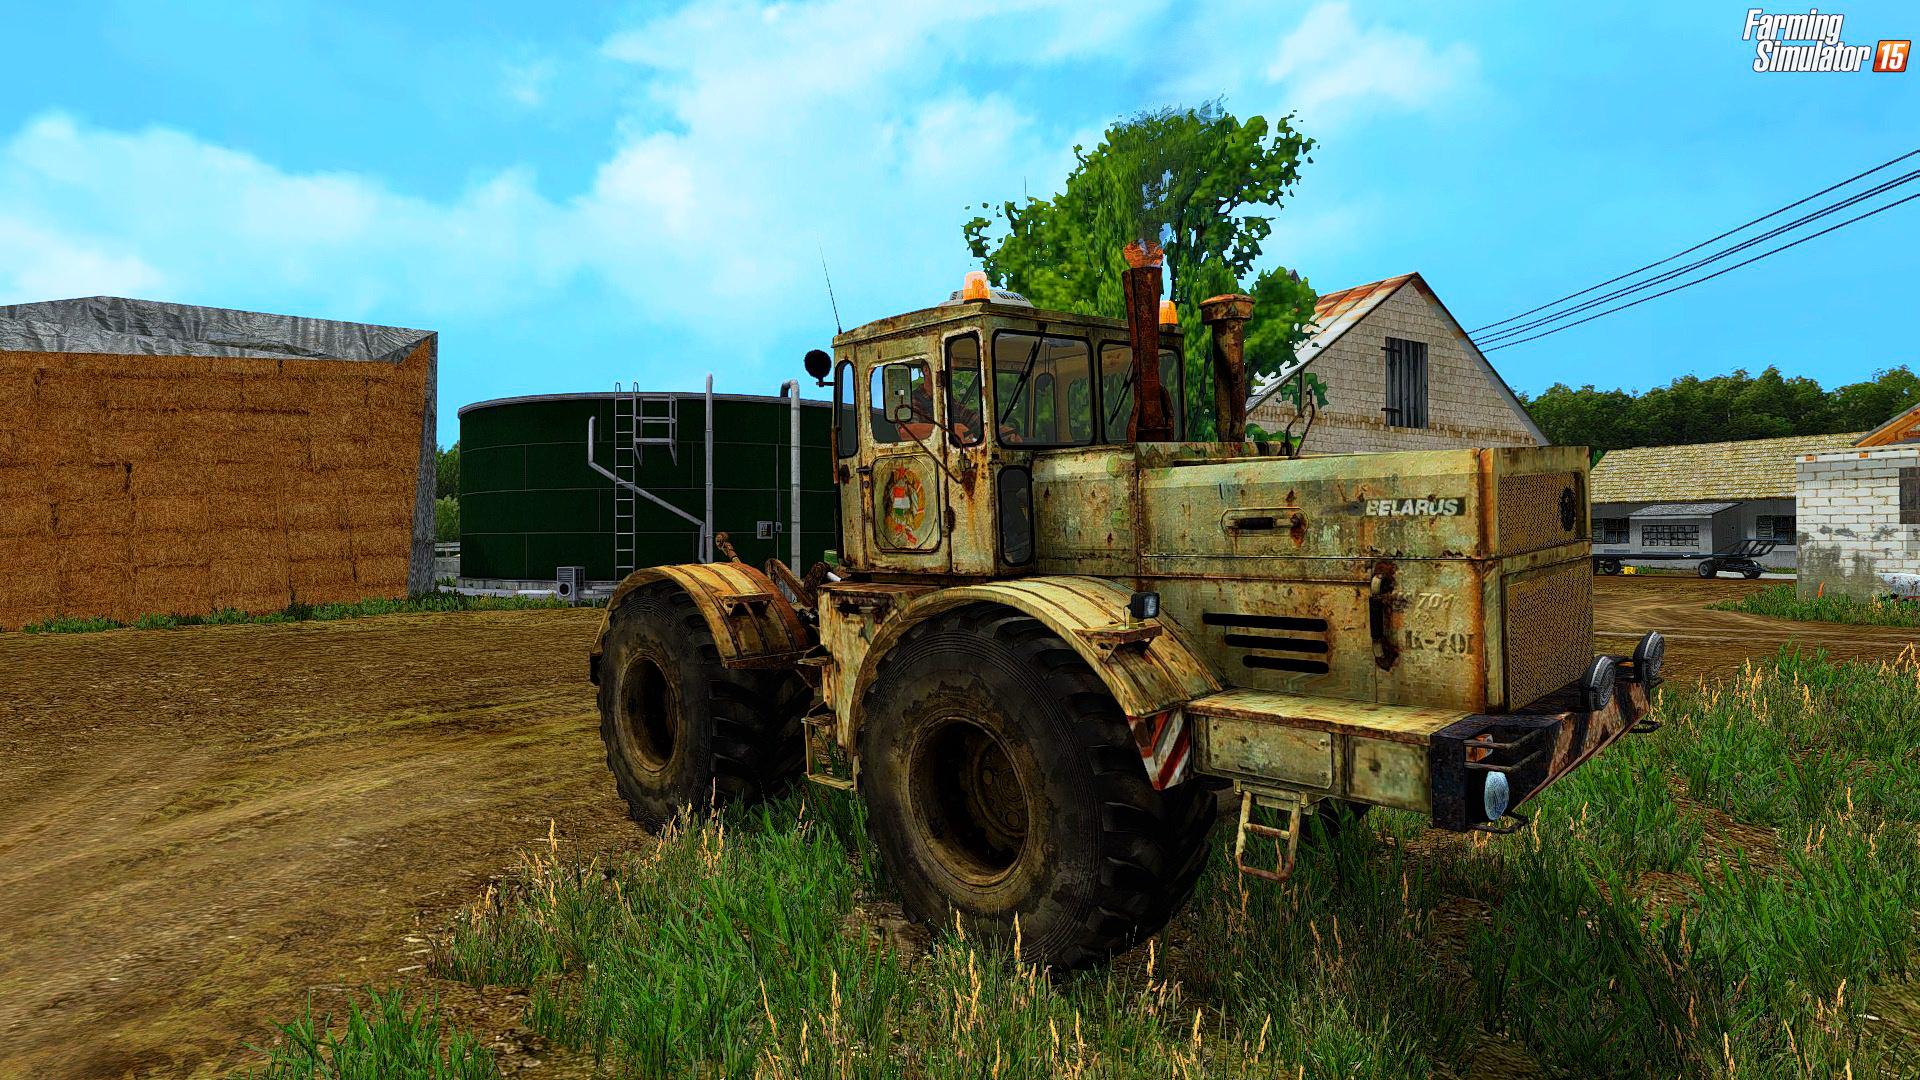 tractor-kirovec-k-701-old-edition-v2-0_1